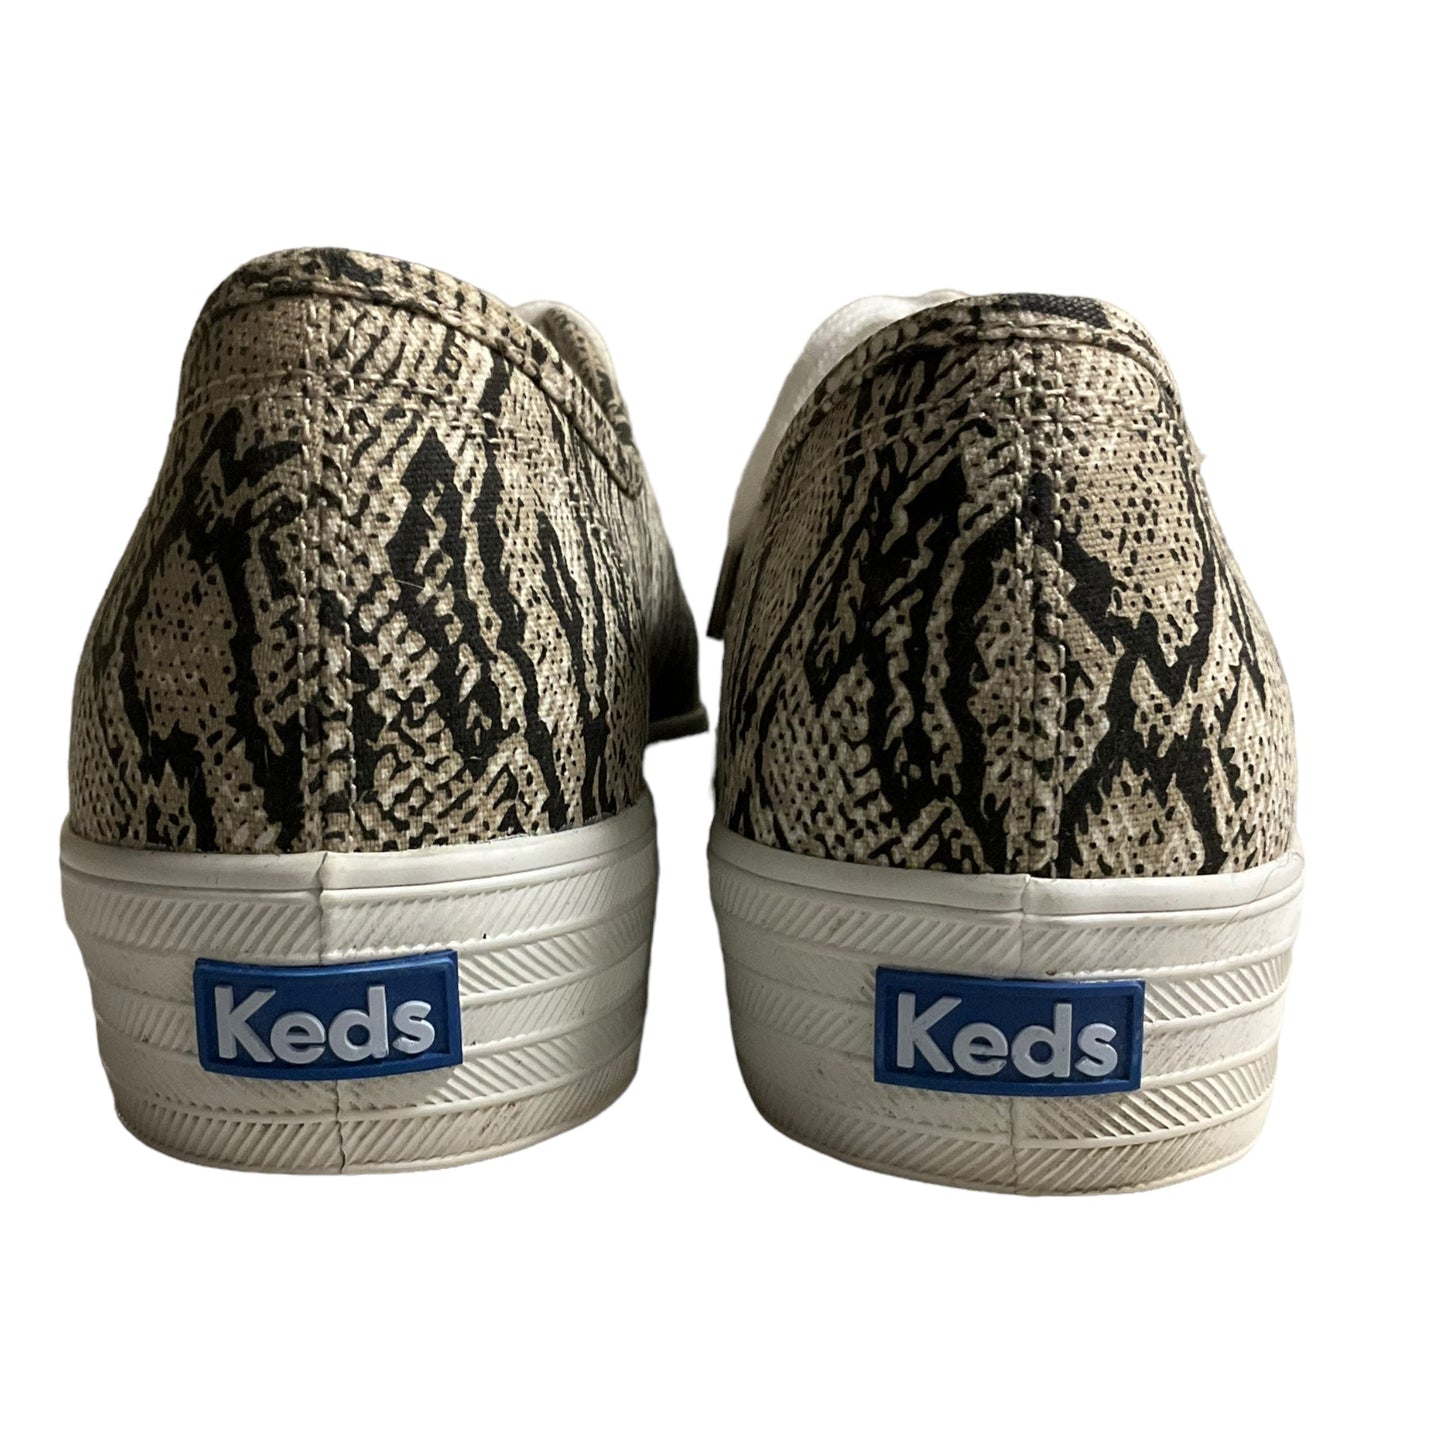 Animal Print Shoes Sneakers Keds, Size 10